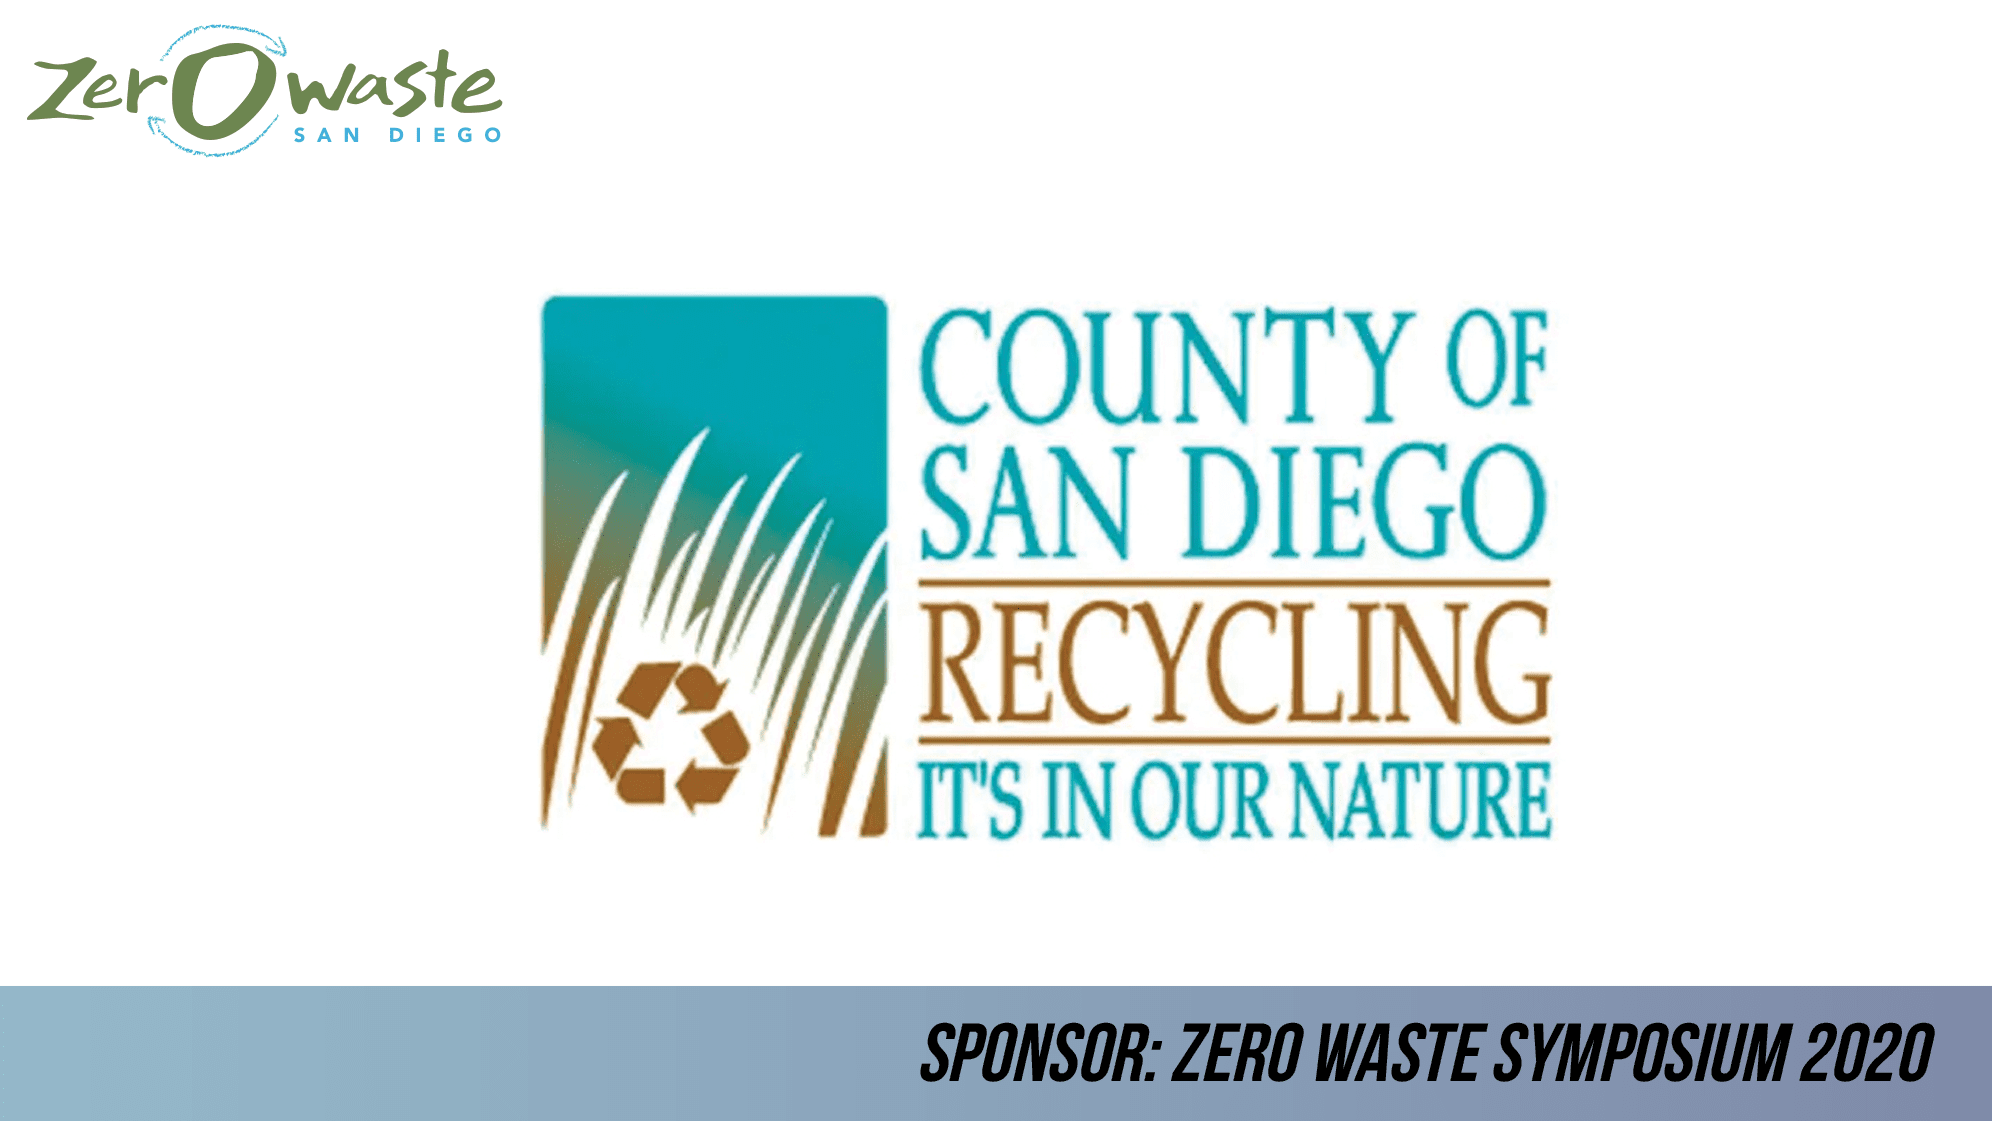 County of San Diego Recycling